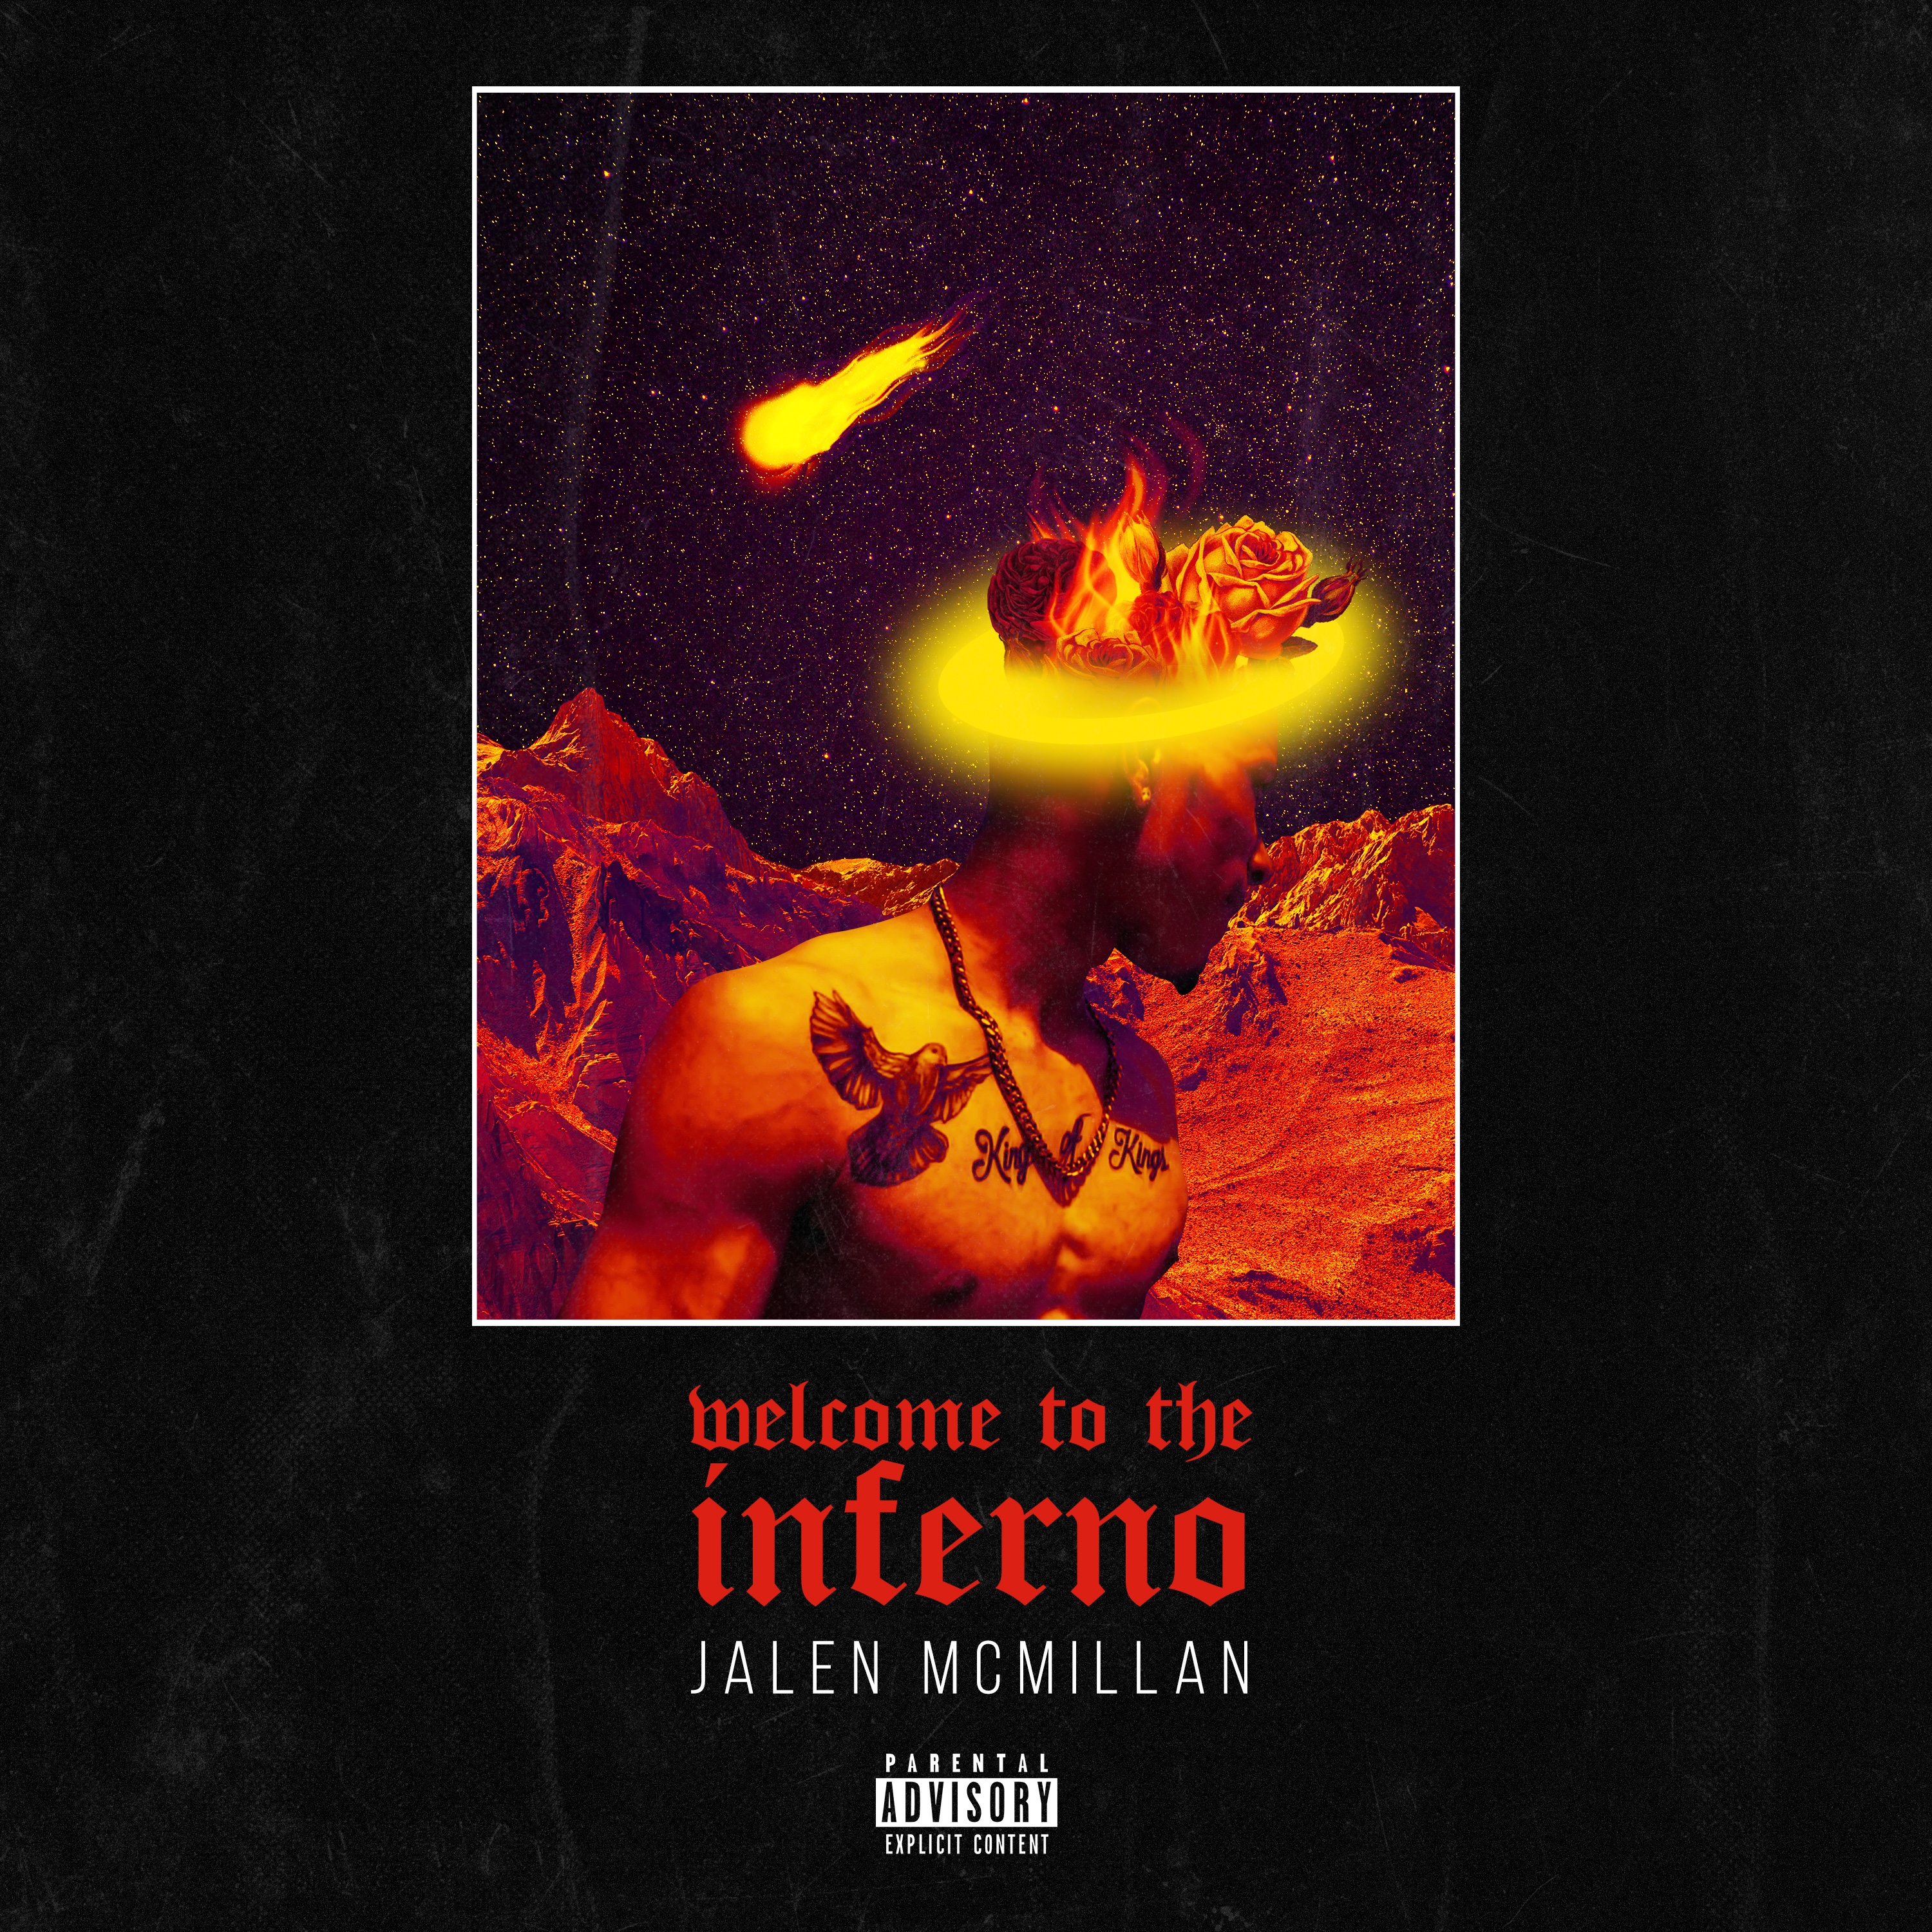 Listen To “Welcome To The Inferno” By Jalen McMillan